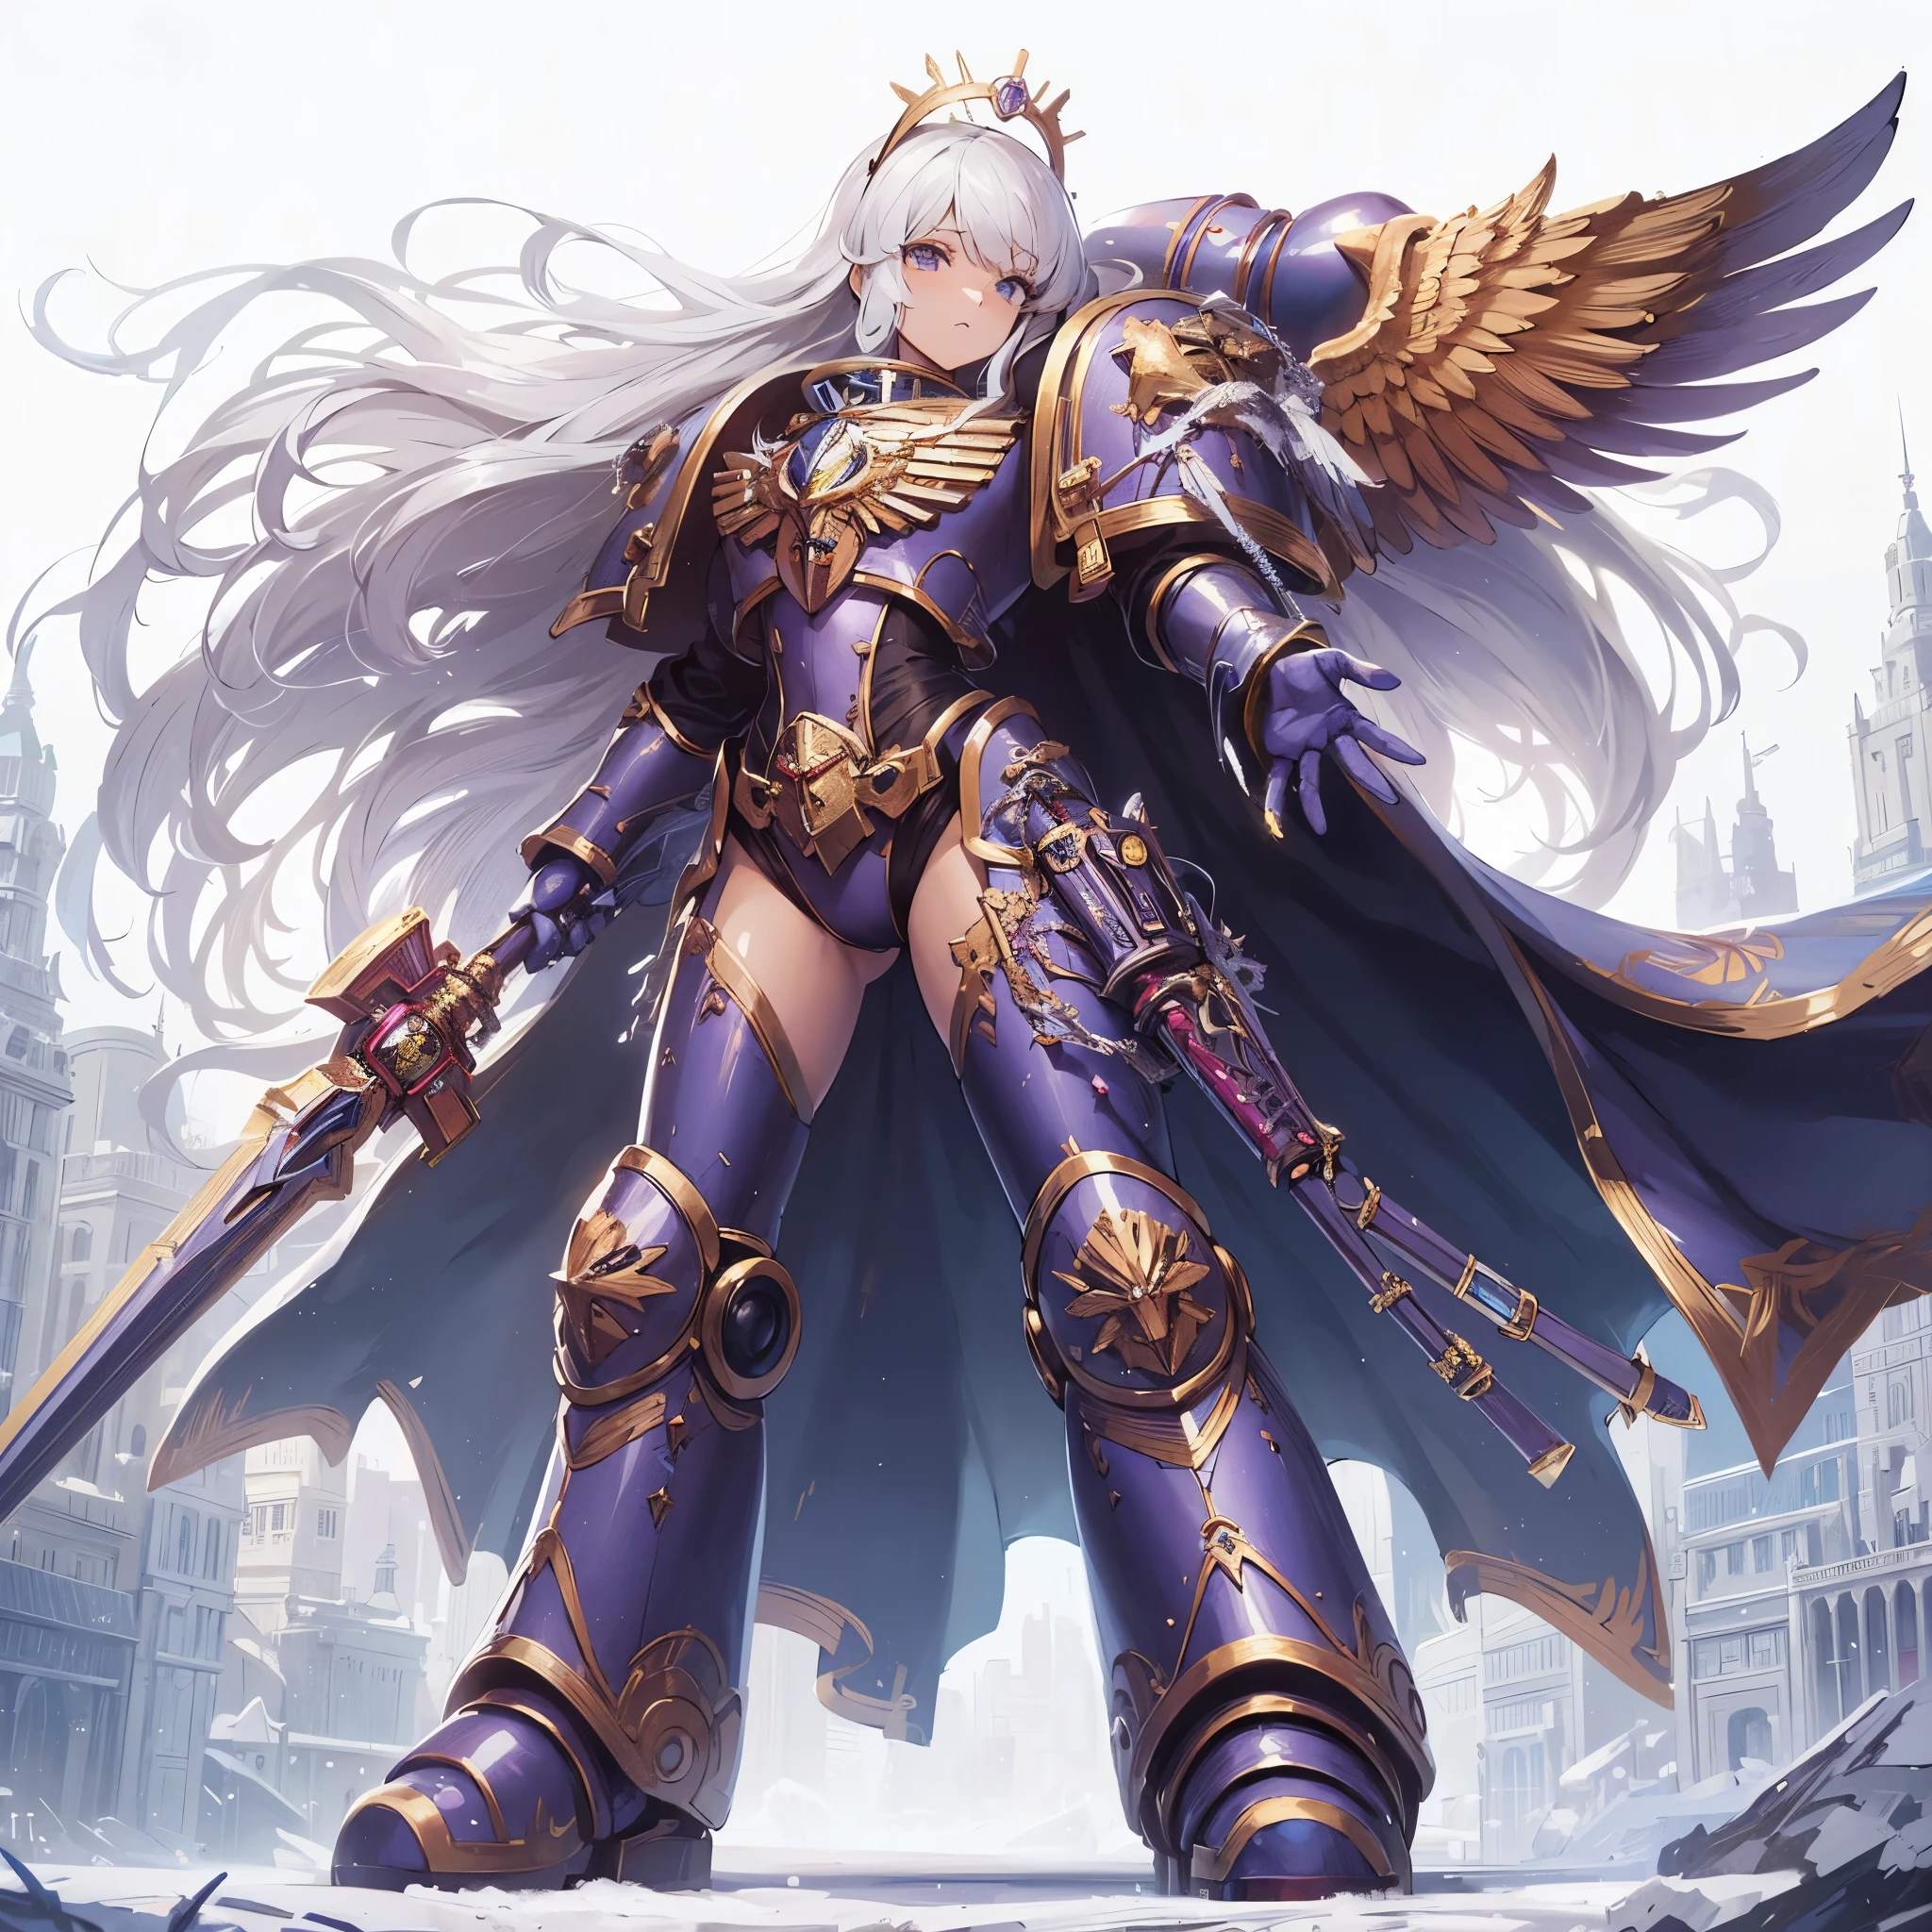 
Masterpiece, best quality, ultra-detailed, anime style, solo, full body of space marine girl, metallic purple power armor with gold trim, shining white long hair, eagle symbol, held gorgeous rapier, wearing raised boots, standing on city, Warhammer 40K, 8k high resolution, trending art station, white background, whole body,
